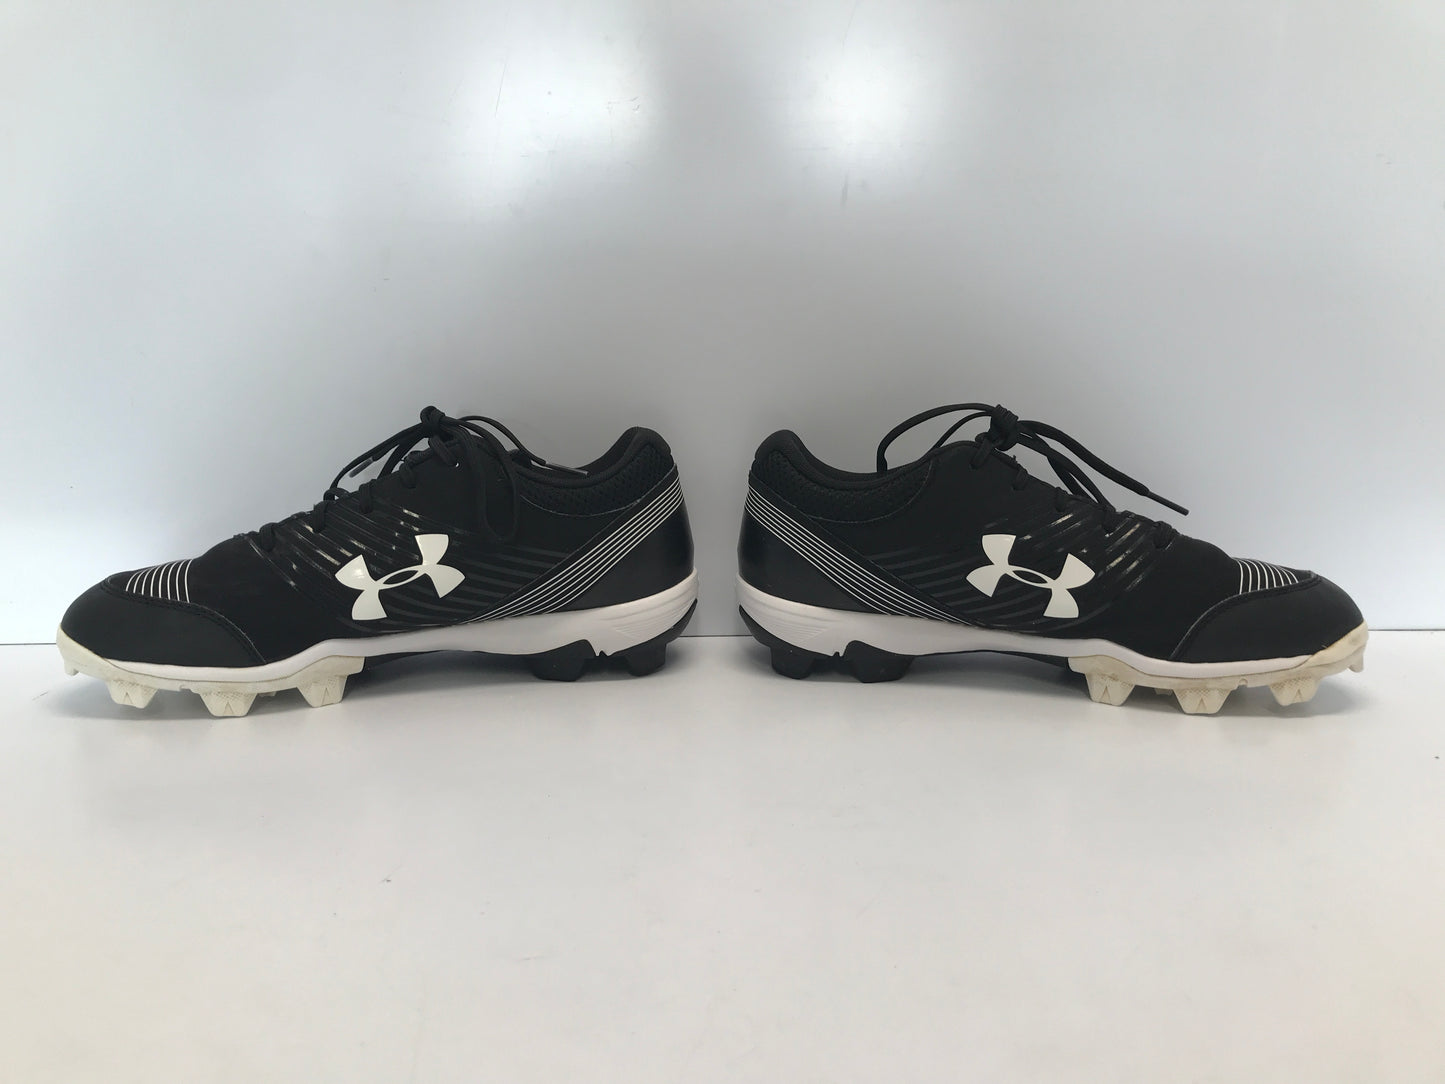 Baseball Shoes Cleats Men's Size 9 Under Armour Black White Like New